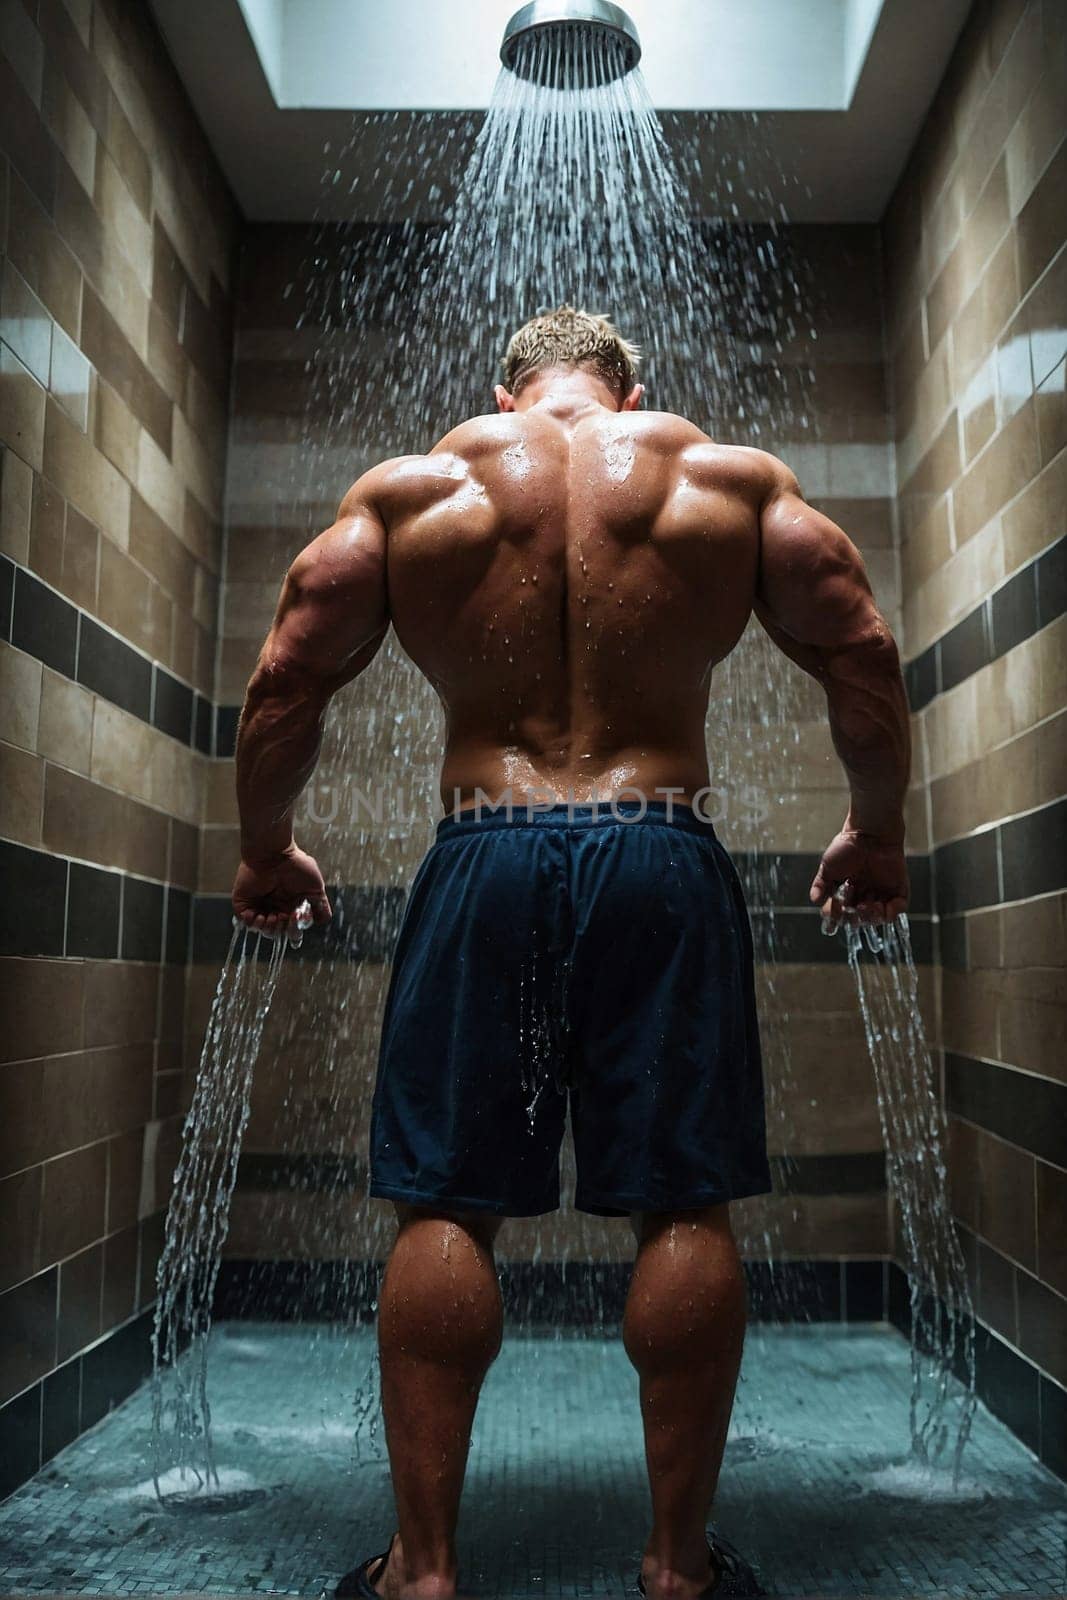 A handsome naked muscular man stands in a shower with his back facing the camera, displaying strength and confidence.